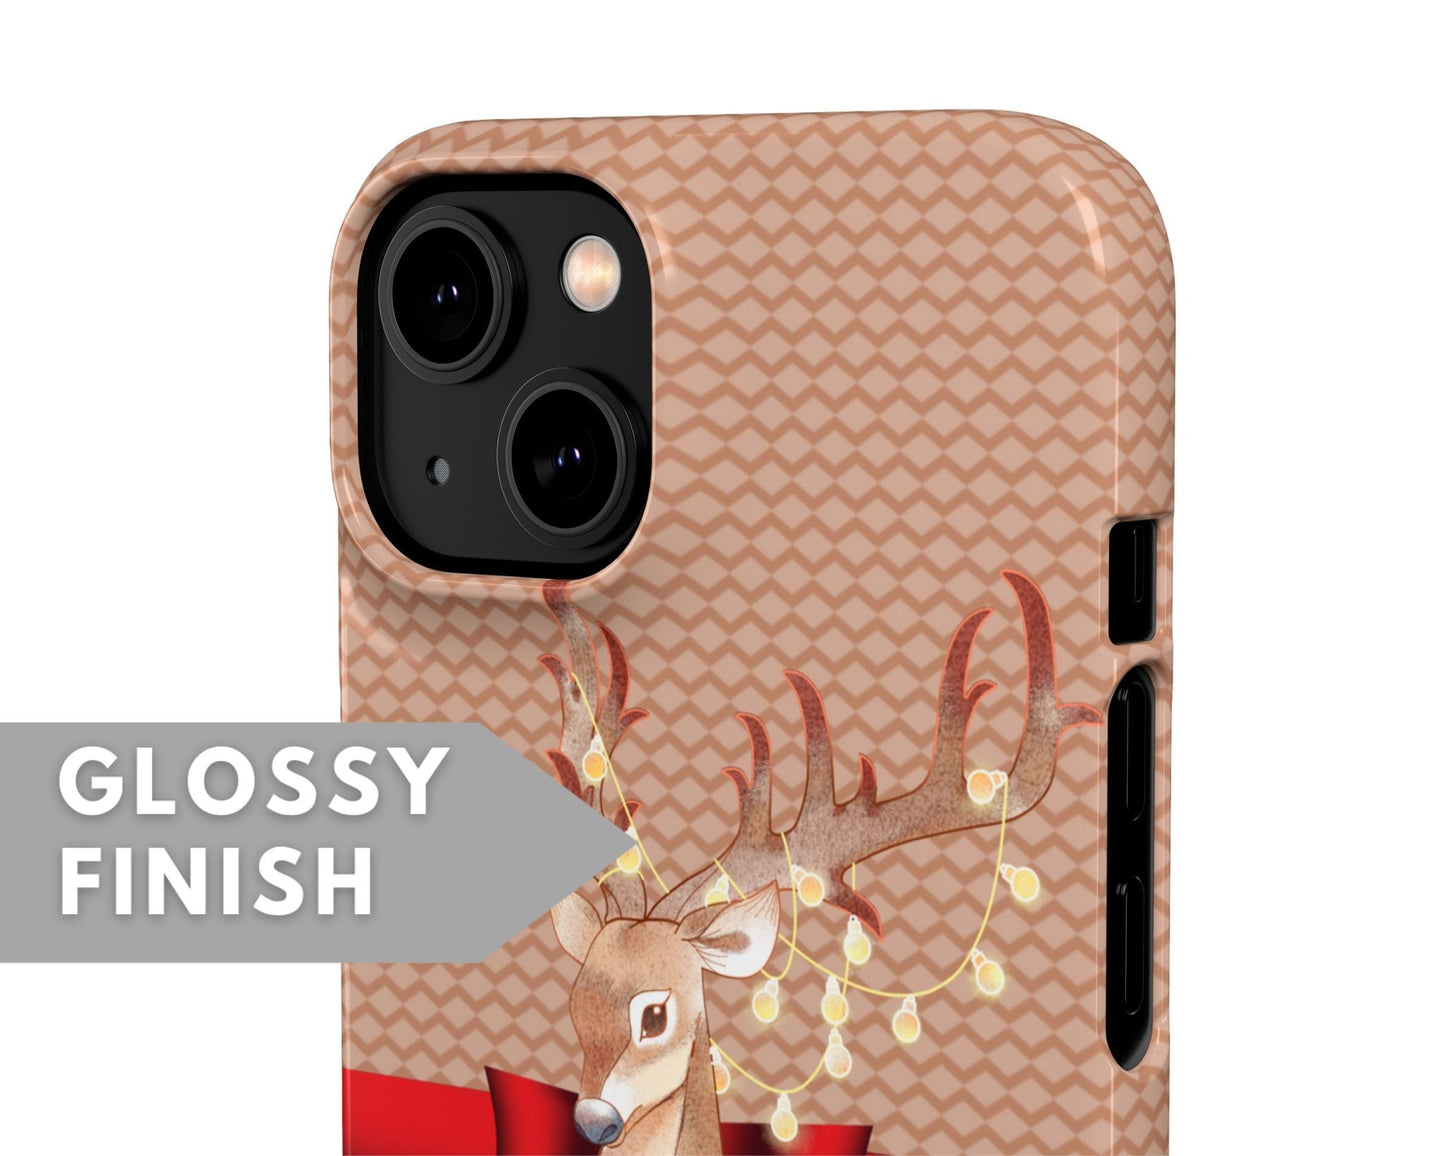 Christmas Snap Case with Deer - Classy Cases